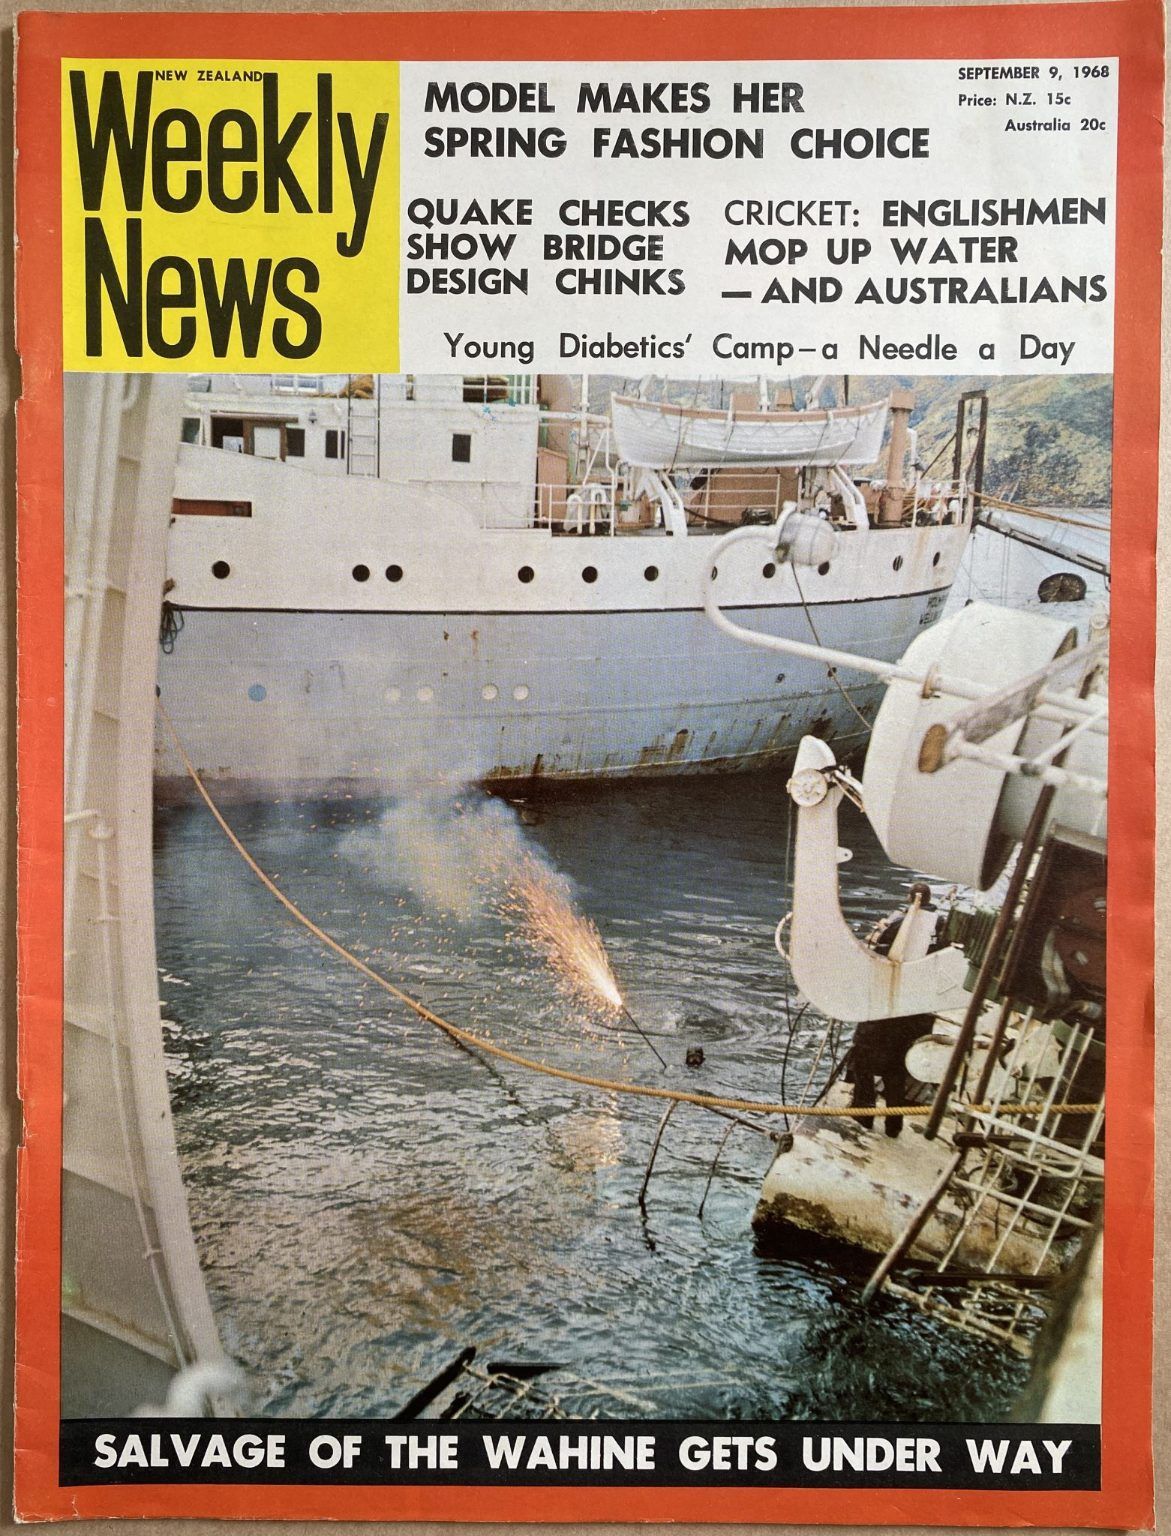 OLD NEWSPAPER: New Zealand Weekly News, 9 September 1968